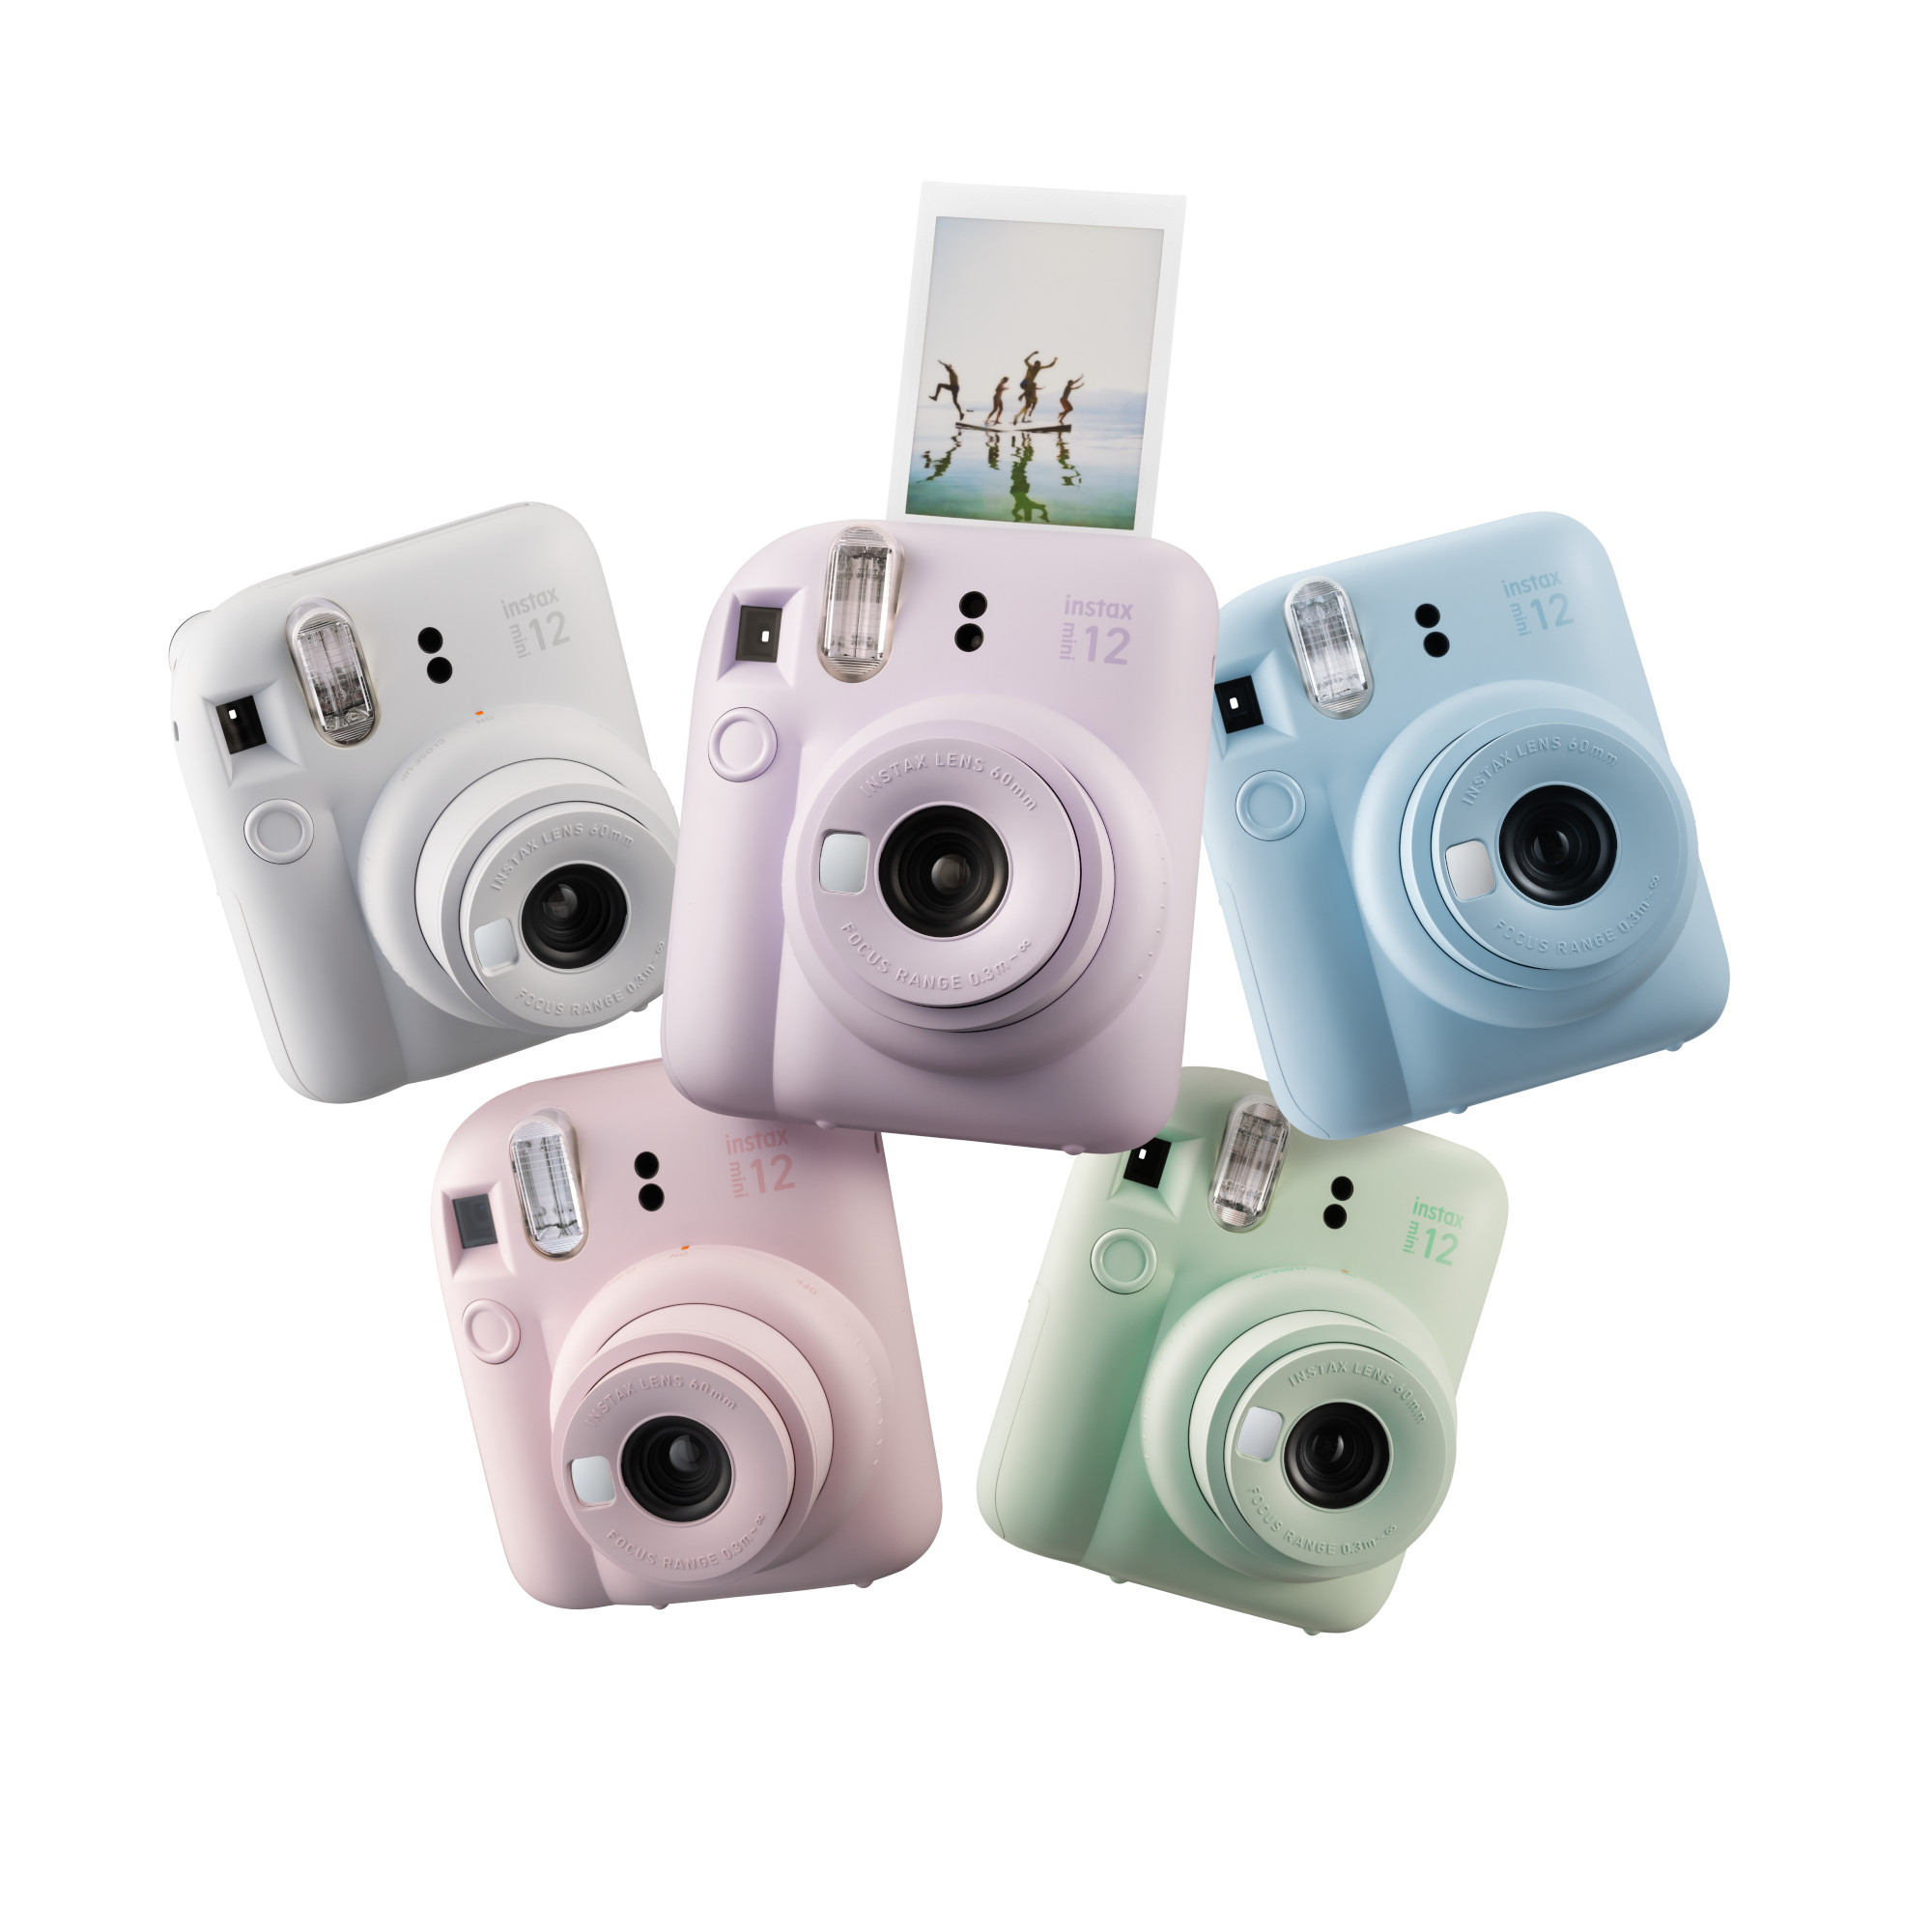 Fujifilm announces Instax Mini 12 entry-level camera and UP! print scan app